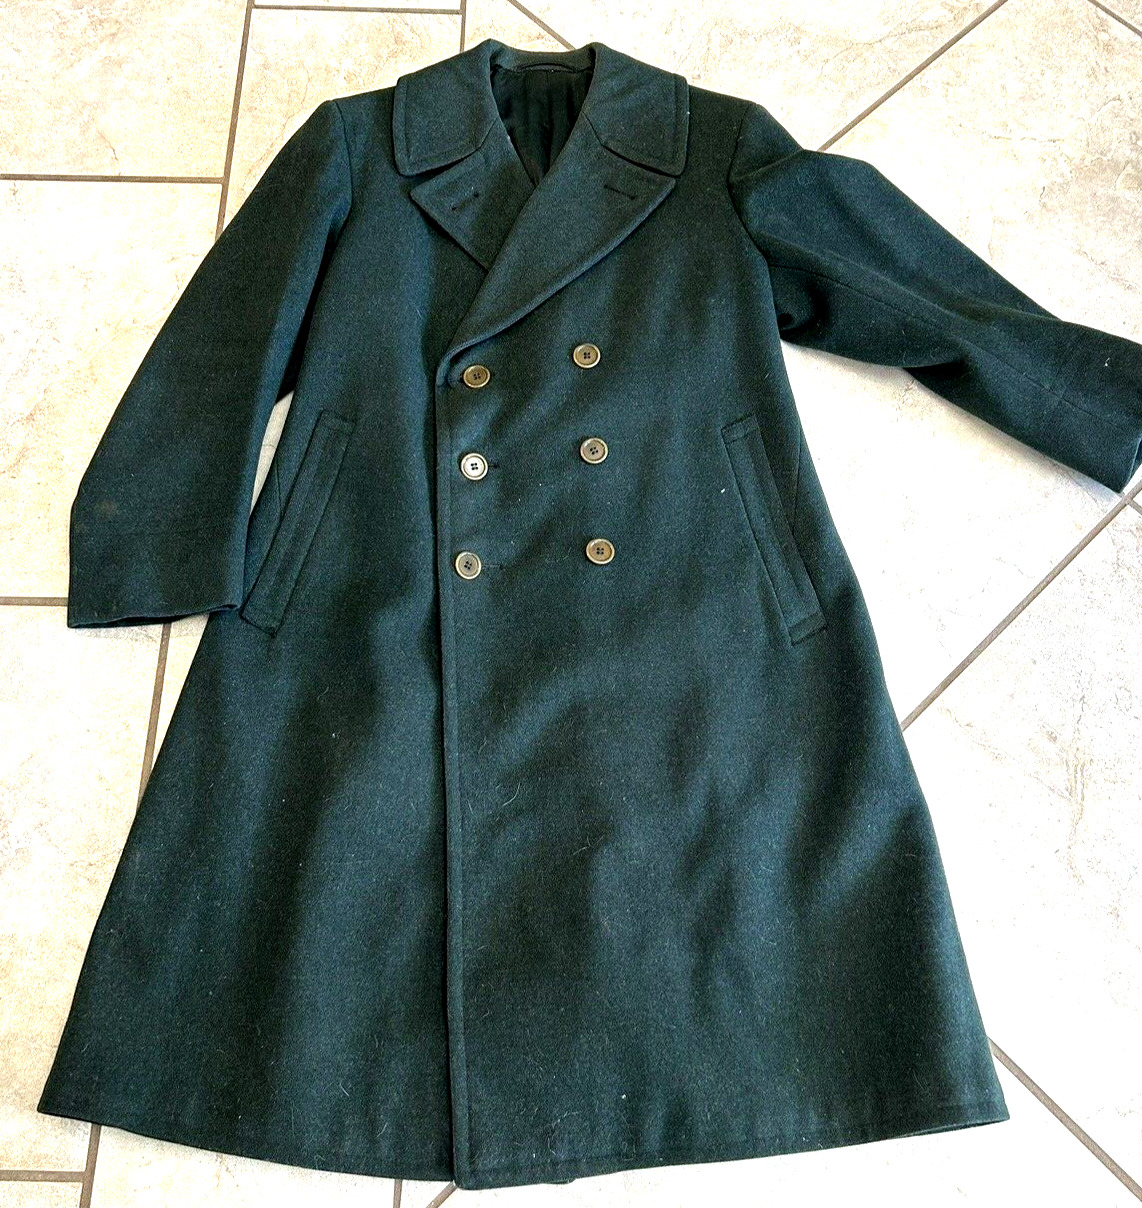 Civilian Conservation Corps CCC Green Wool Coat Vintage 30's Pea Coat Smith-Gray